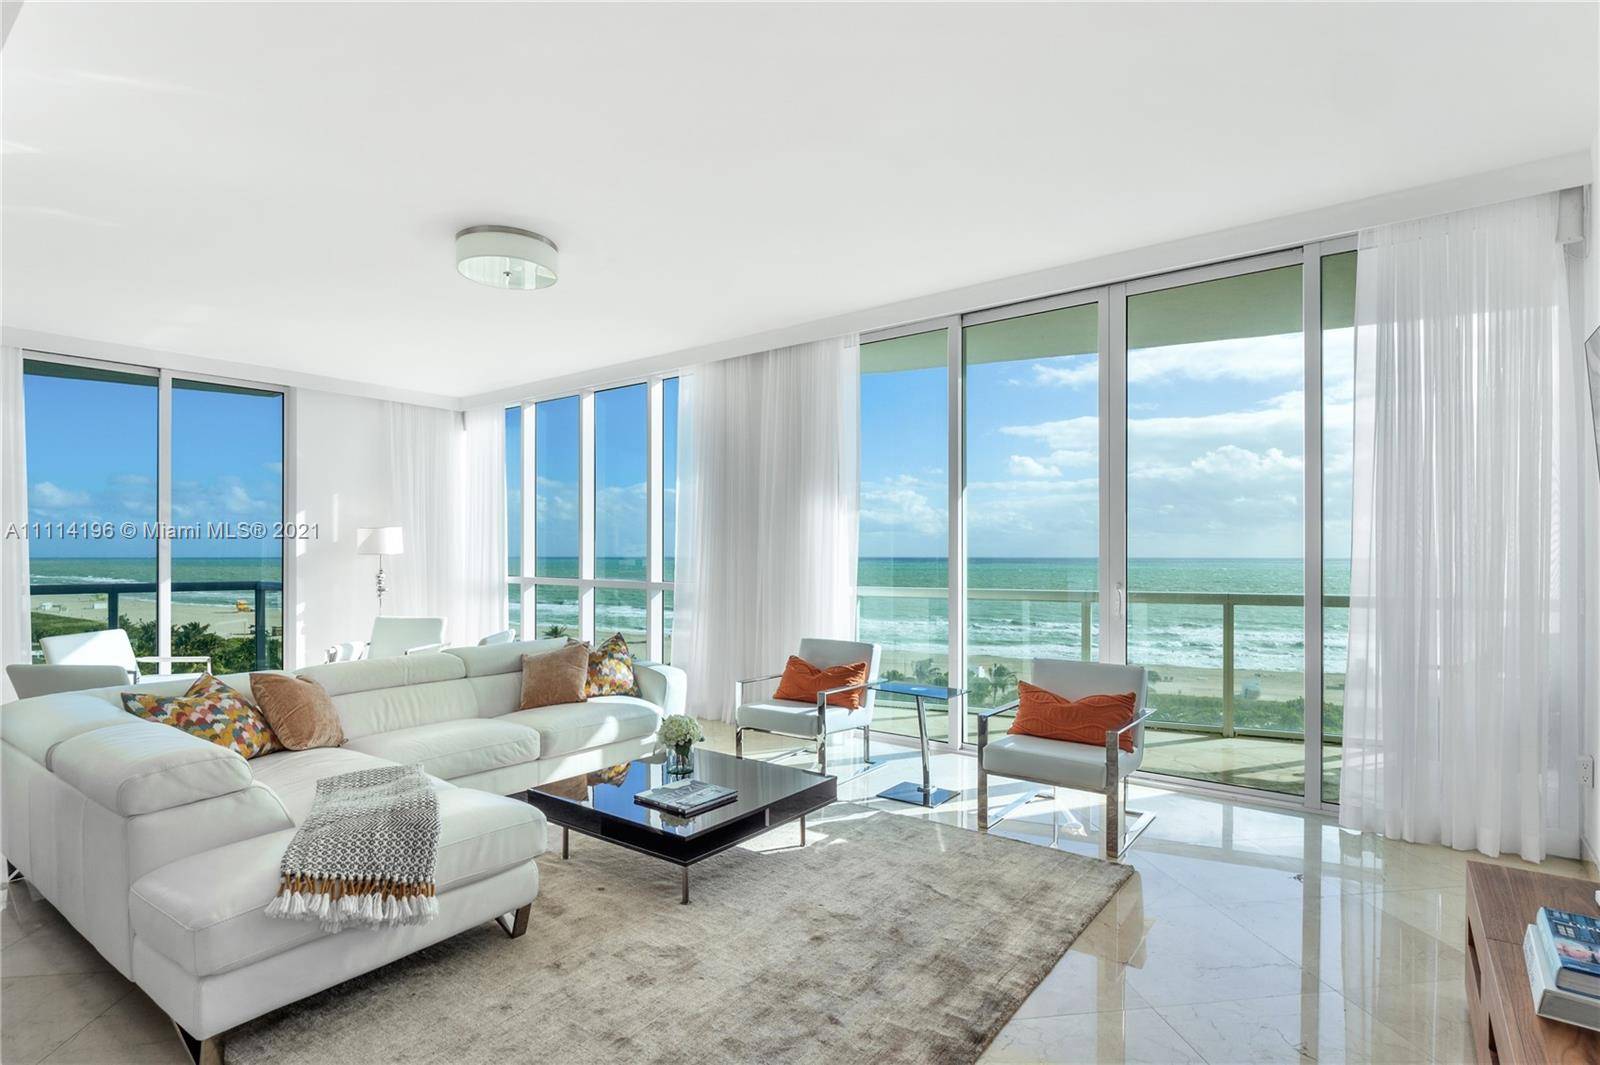 Situated on the North East Corner and Direct Ocean Views, come see the best line of Continuum North !